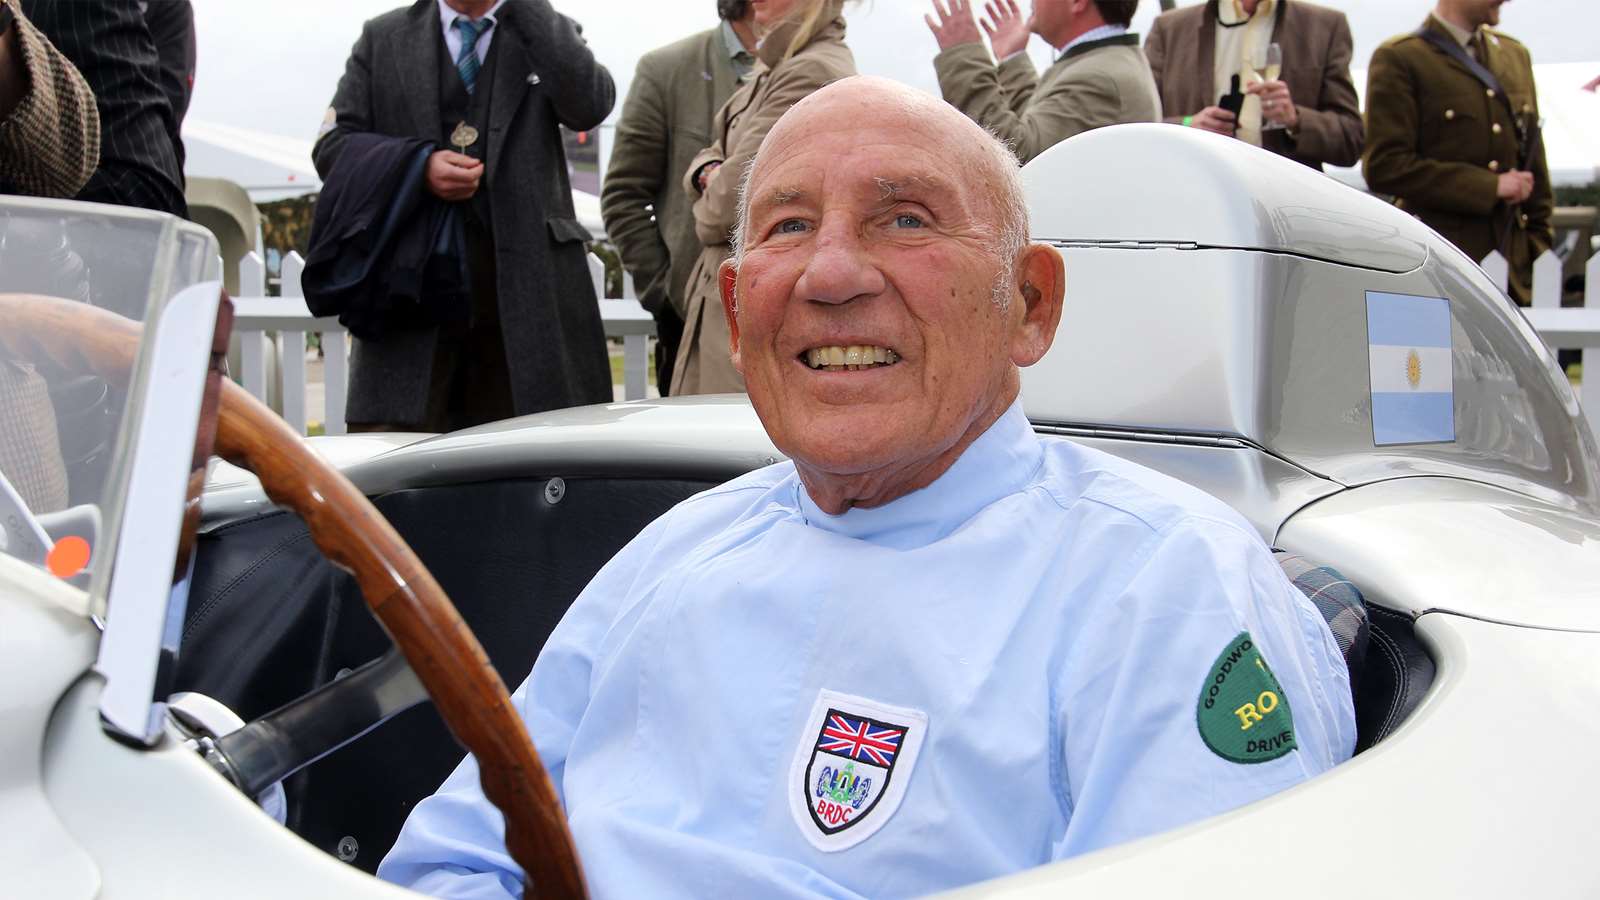 Champions Pay Tribute to Stirling Moss in London Ceremony